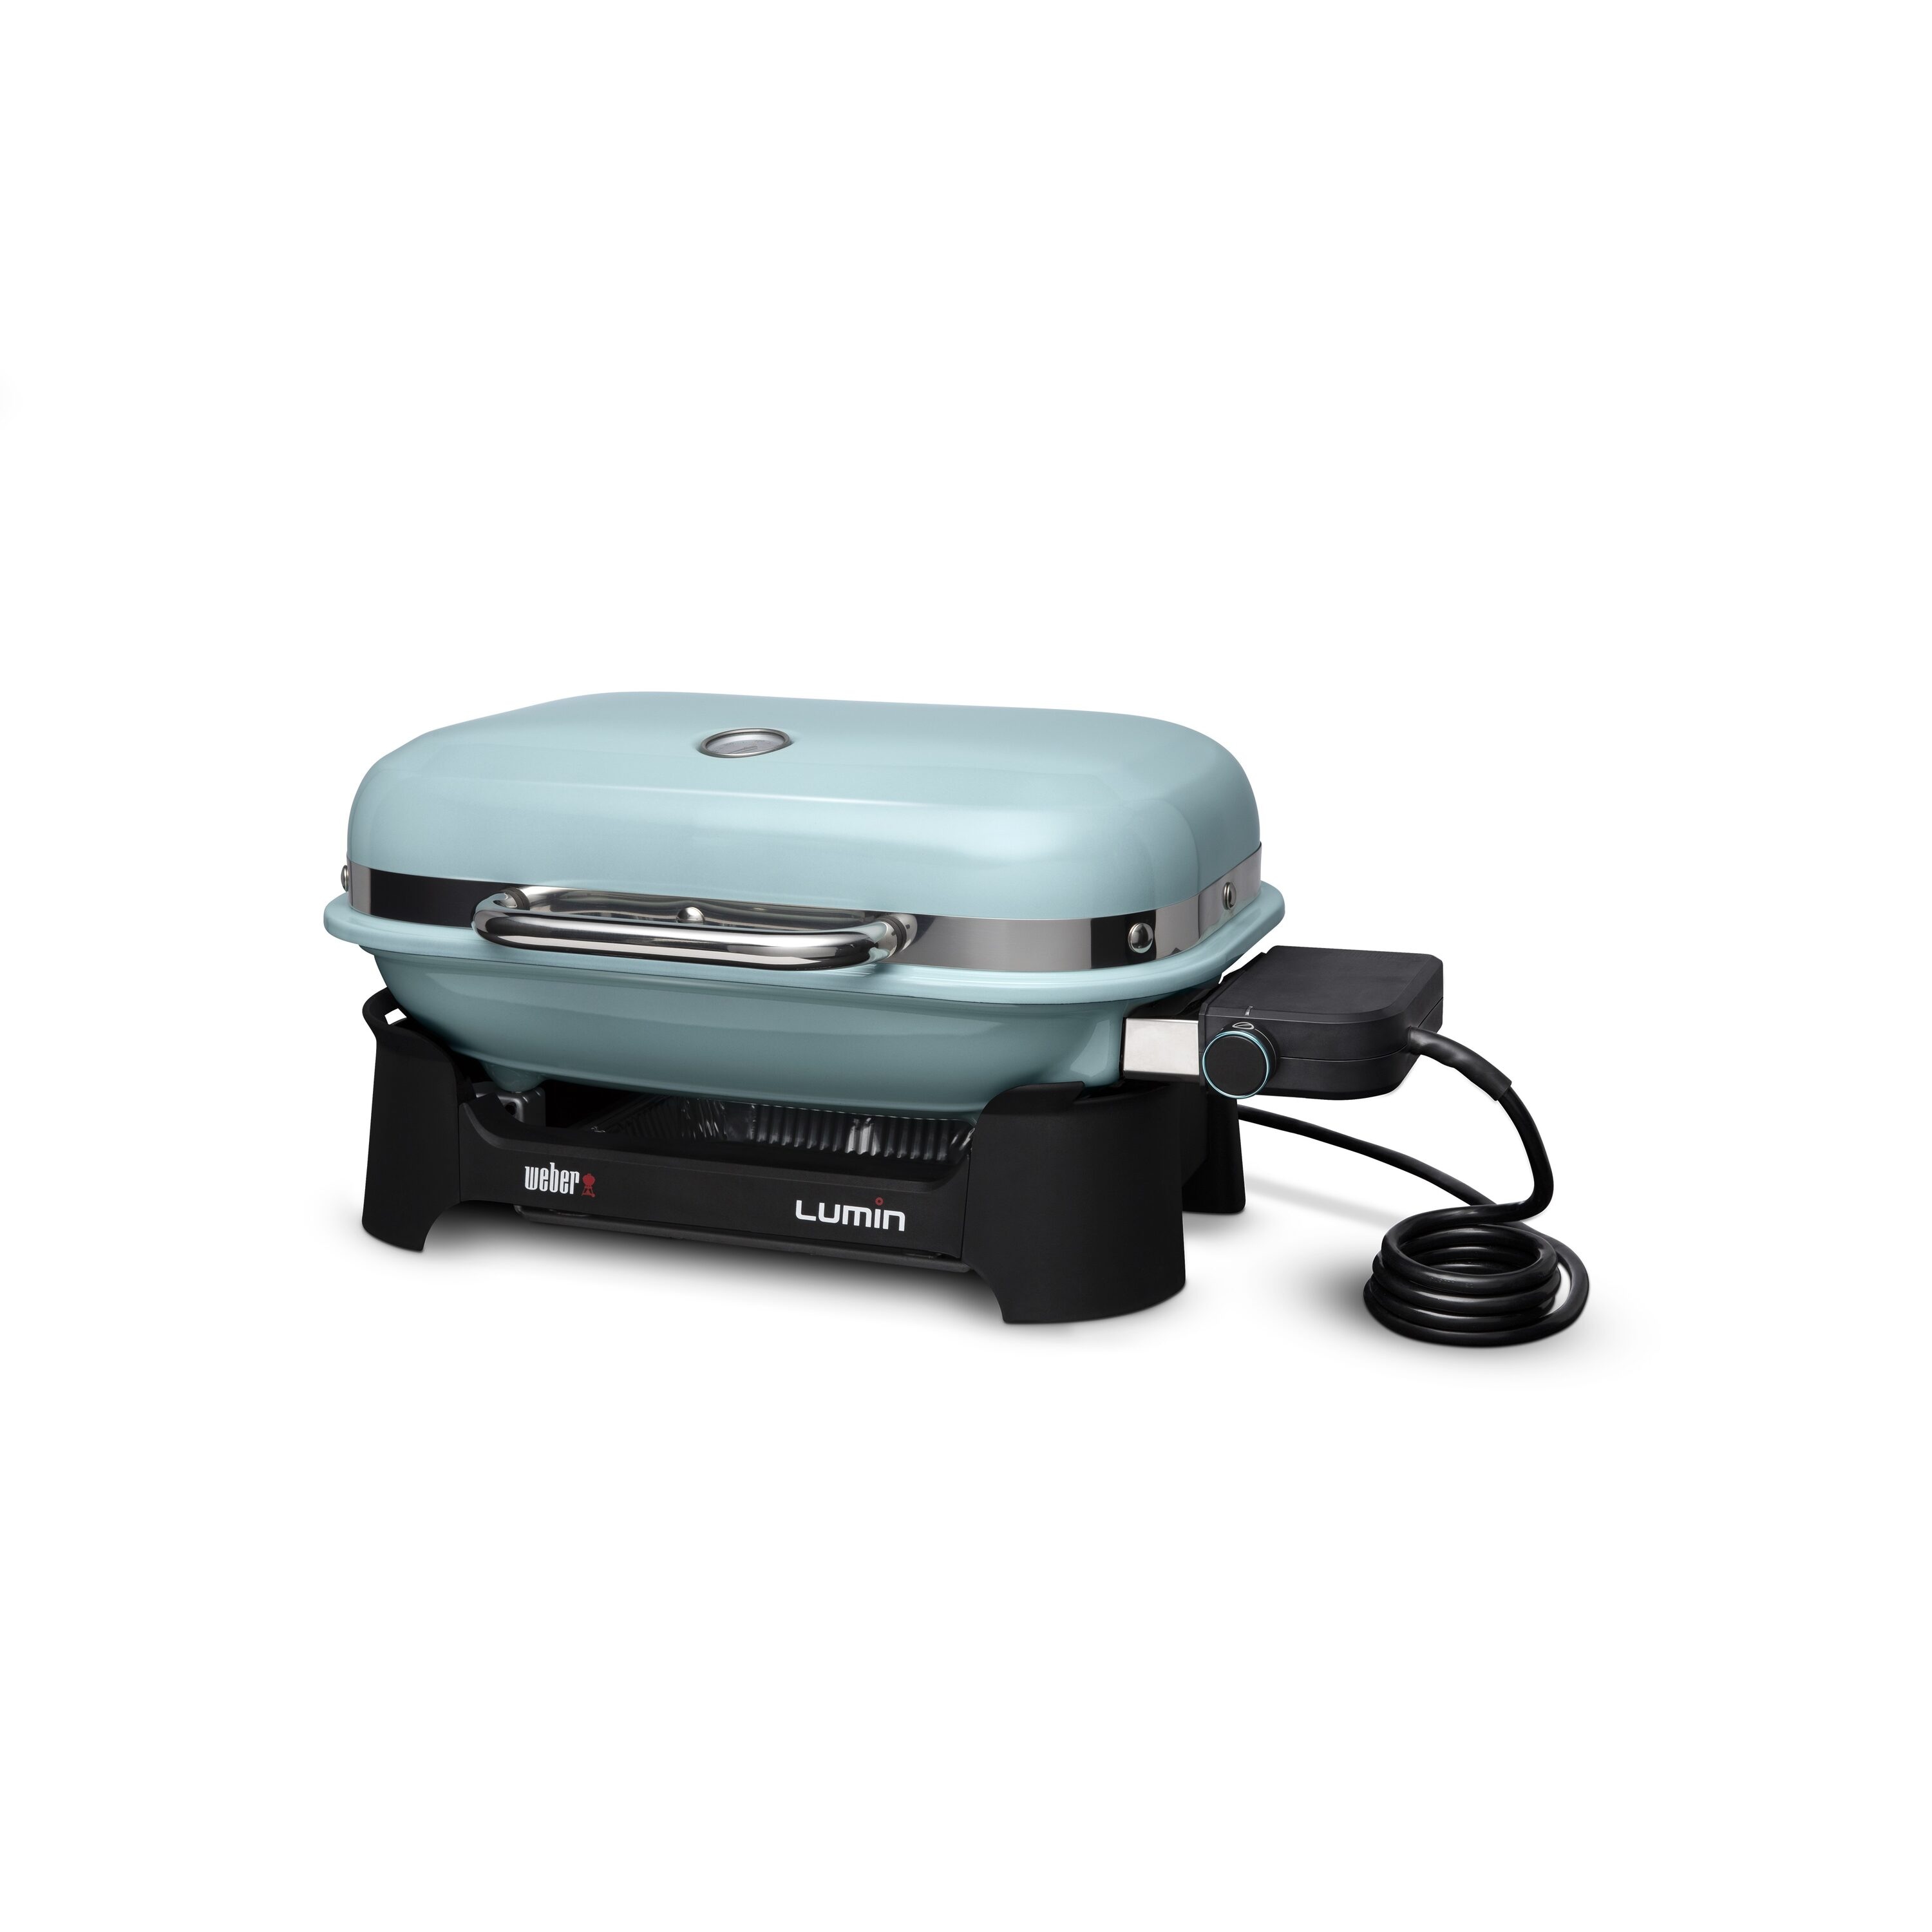 Americana Electric Tabletop Grill with 3-position element-Model 9300U8.181  - Americana Grills